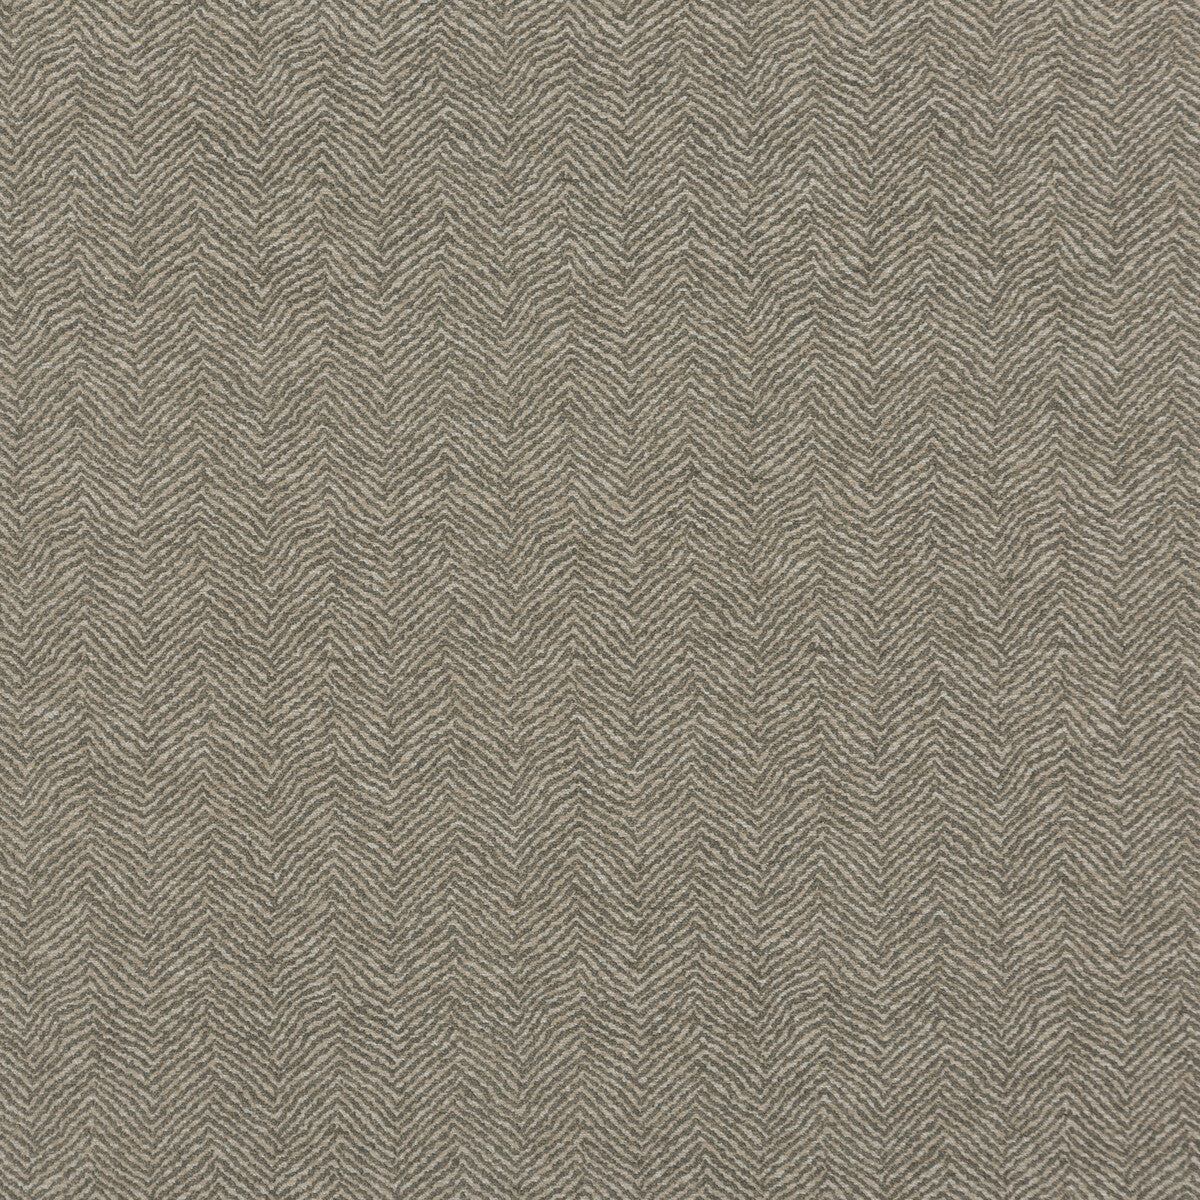 Summit fabric in woodsmoke color - pattern BF10677.935.0 - by G P &amp; J Baker in the Essential Colours collection